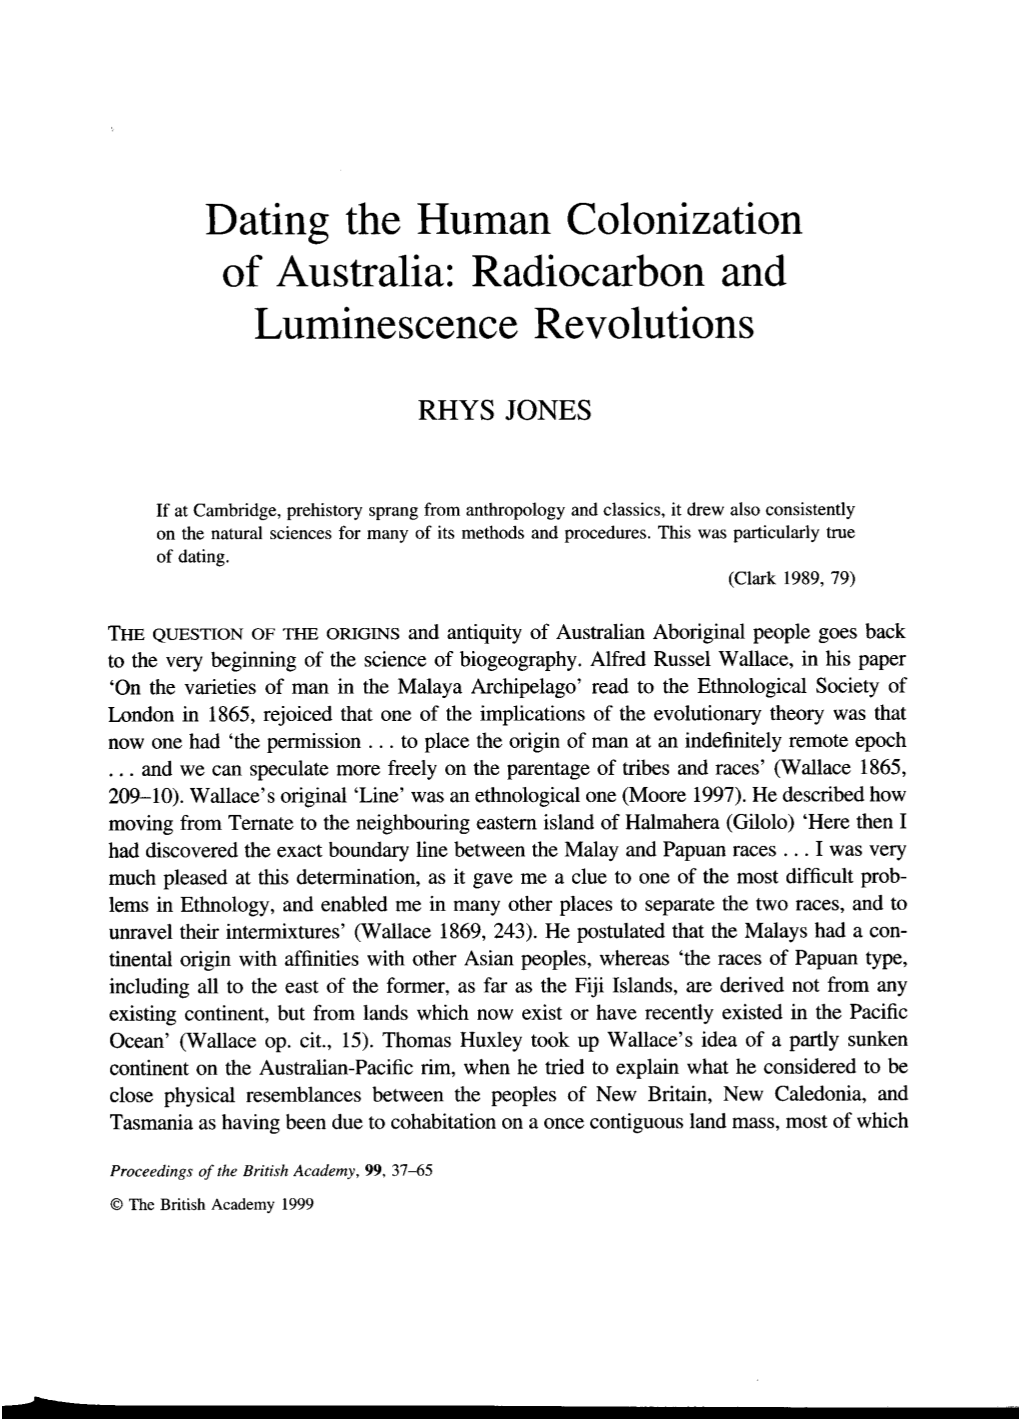 Dating the Human Colonization of Australia: Radiocarbon and Luminescence Revolutions